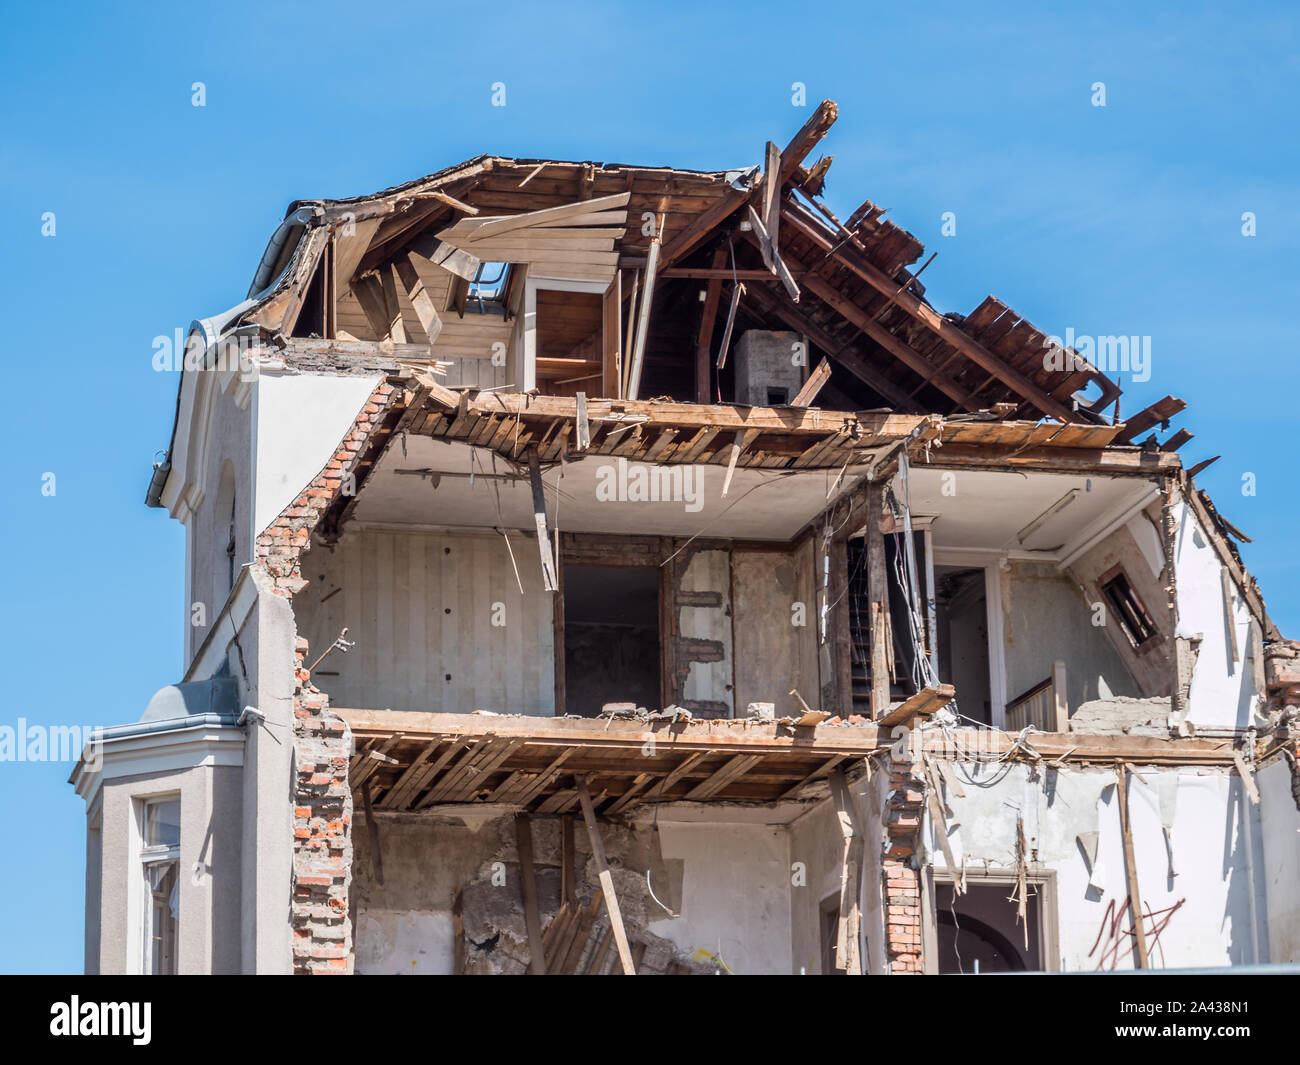 An old ailing house after storm damage Stock Photo